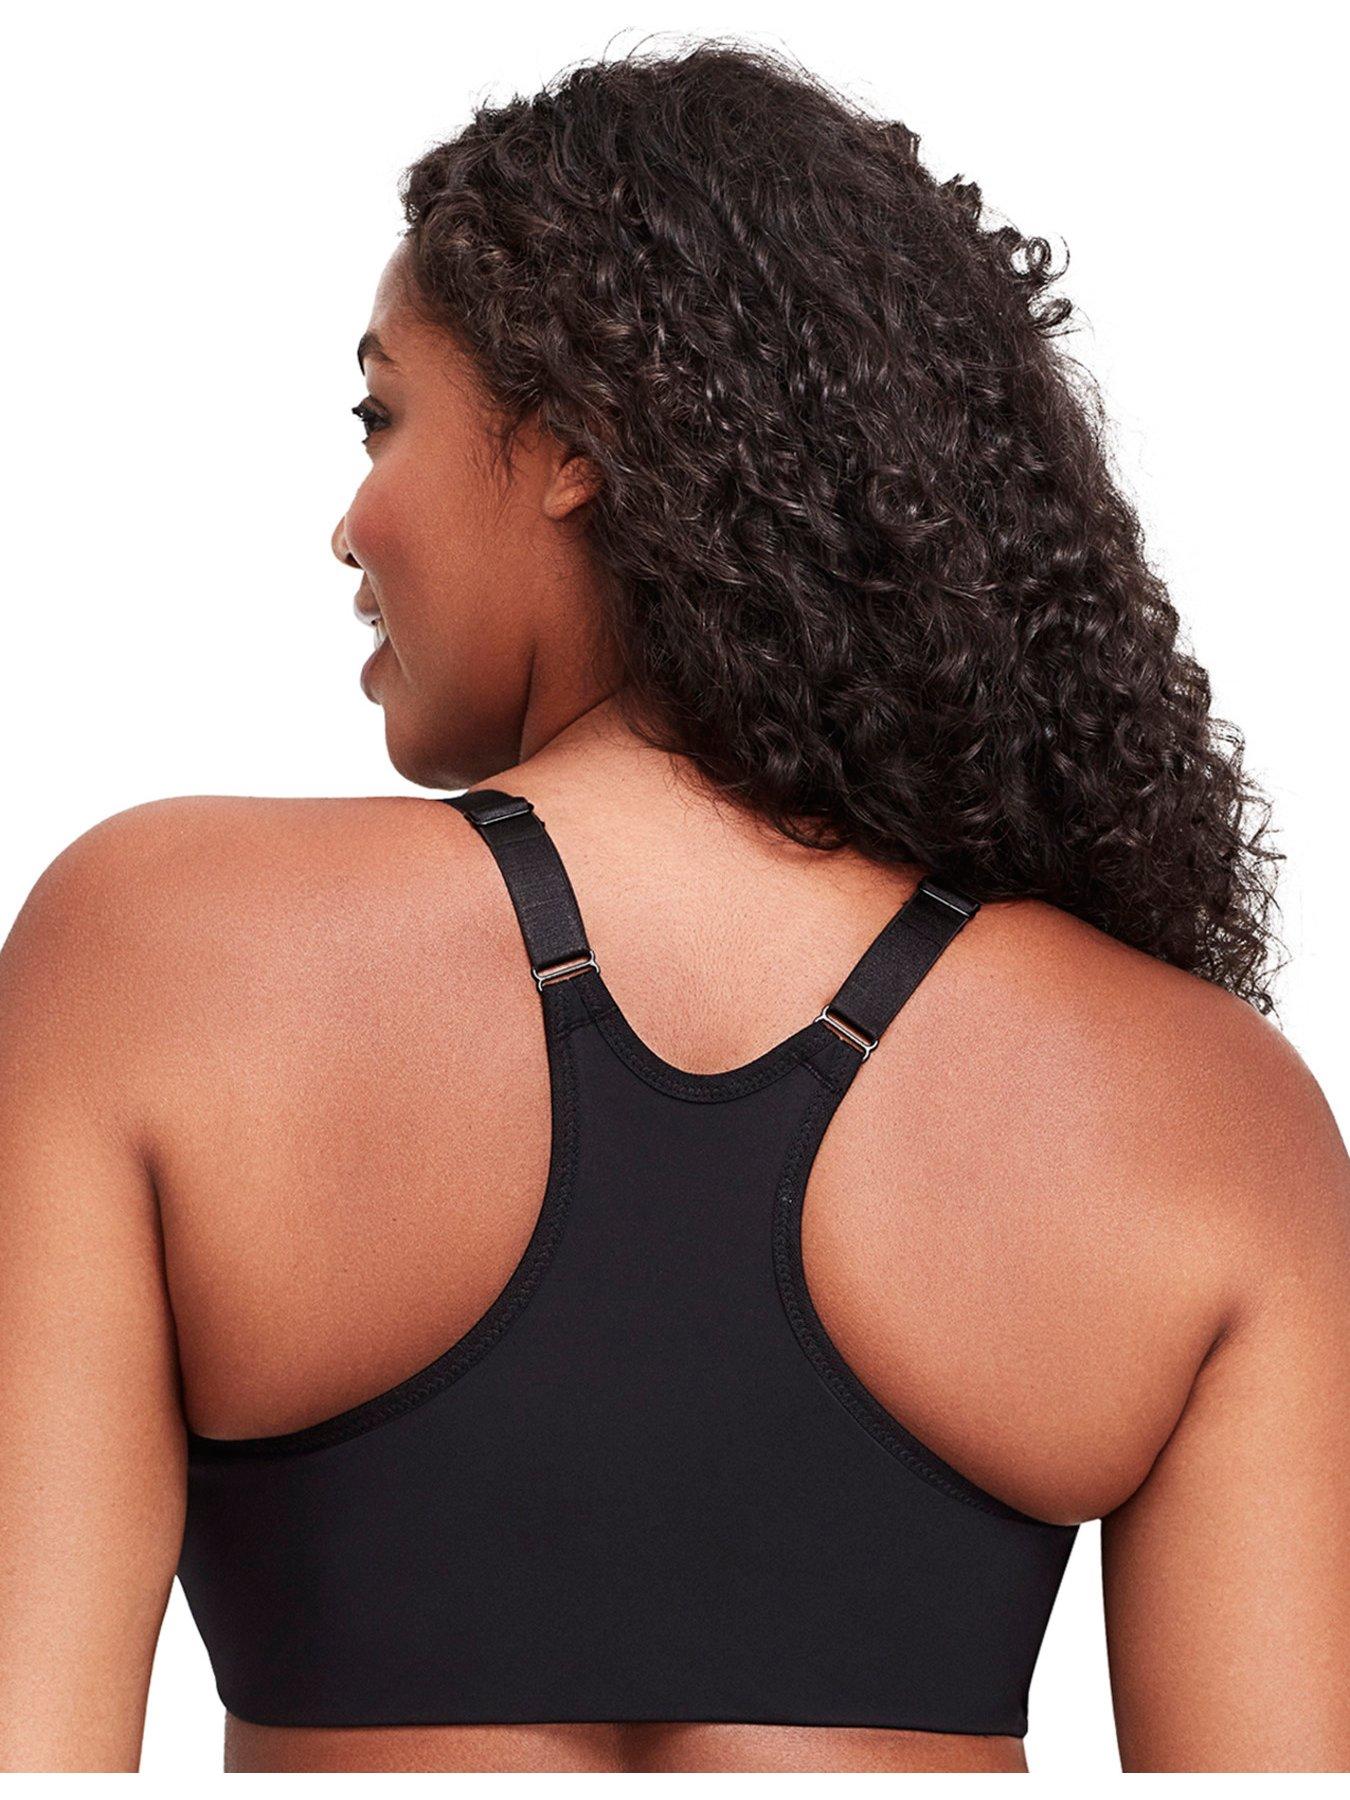 Avia Ladies Racerback Black Sports Bra with Med Support